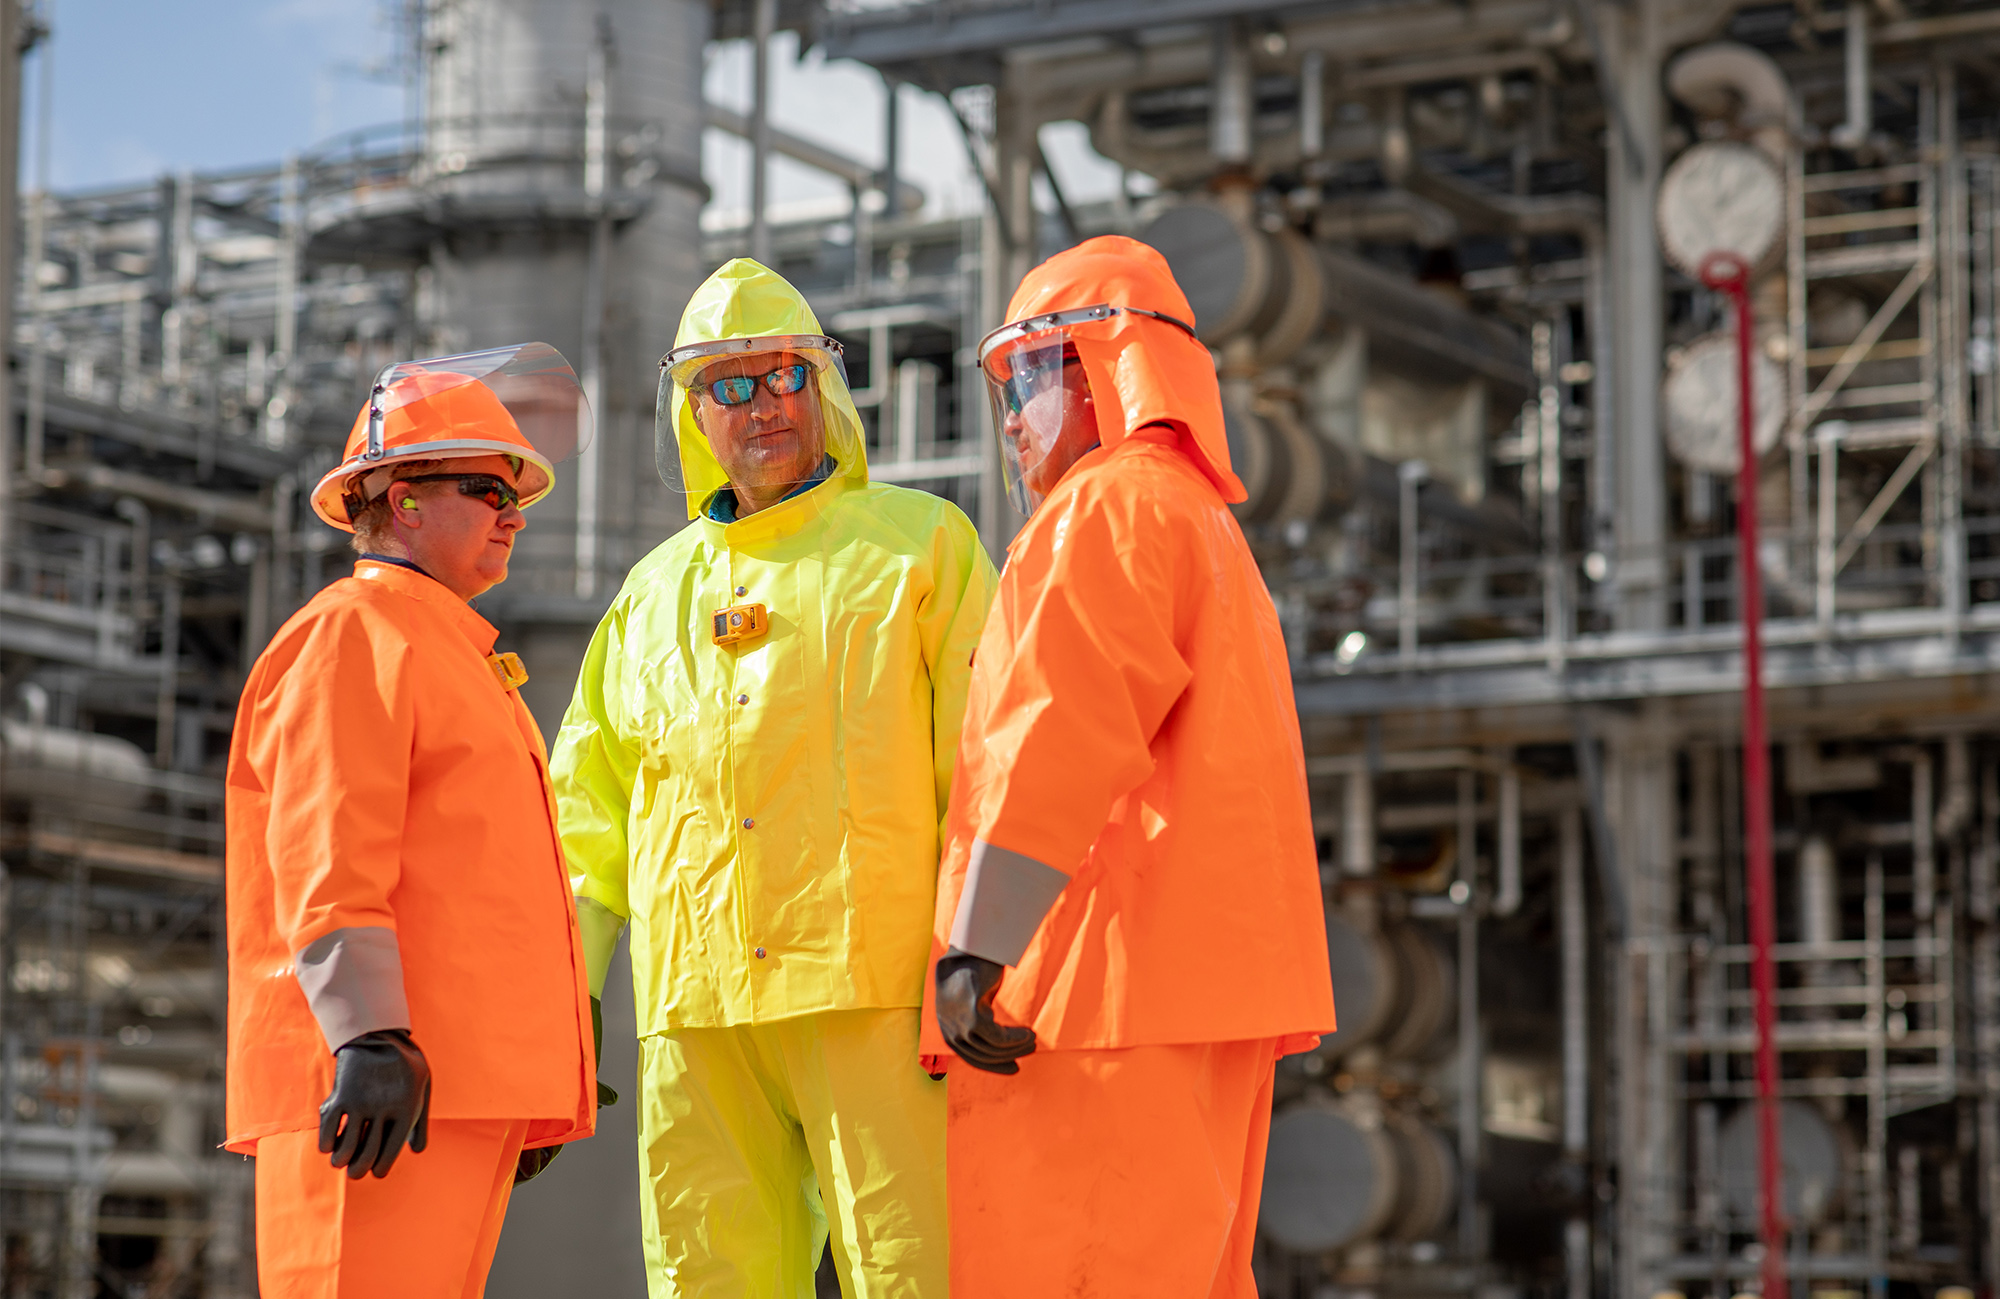 Refinery employees wearing bright colored safety uniforms